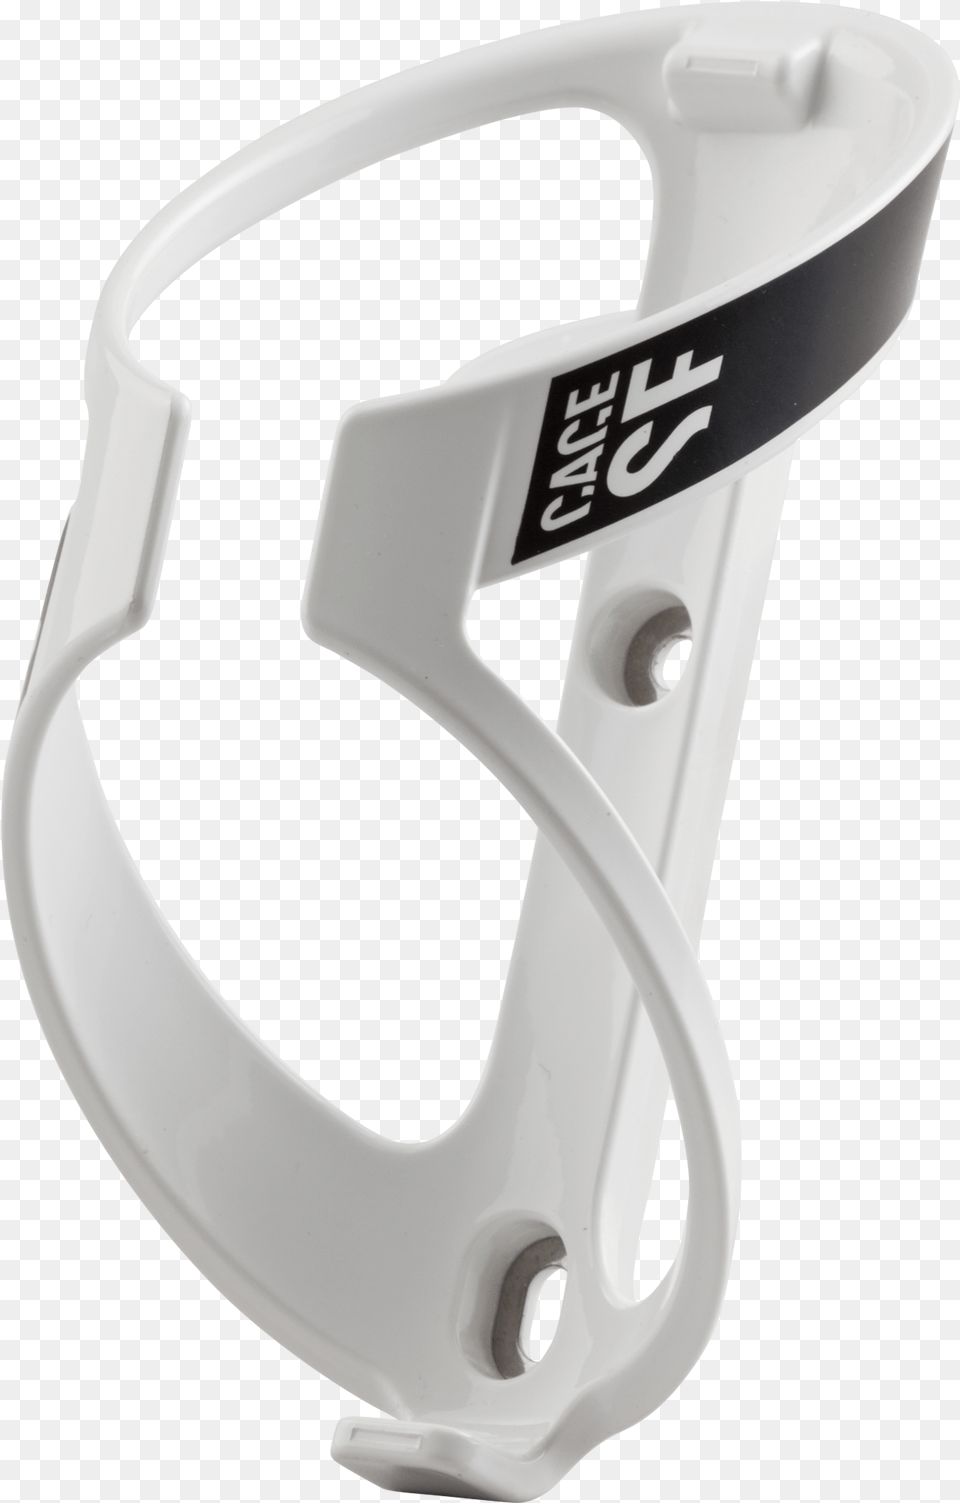 Canyon Cage Sf Bottle Cage Carabiner, Accessories, Bracelet, Jewelry, Electronics Free Transparent Png